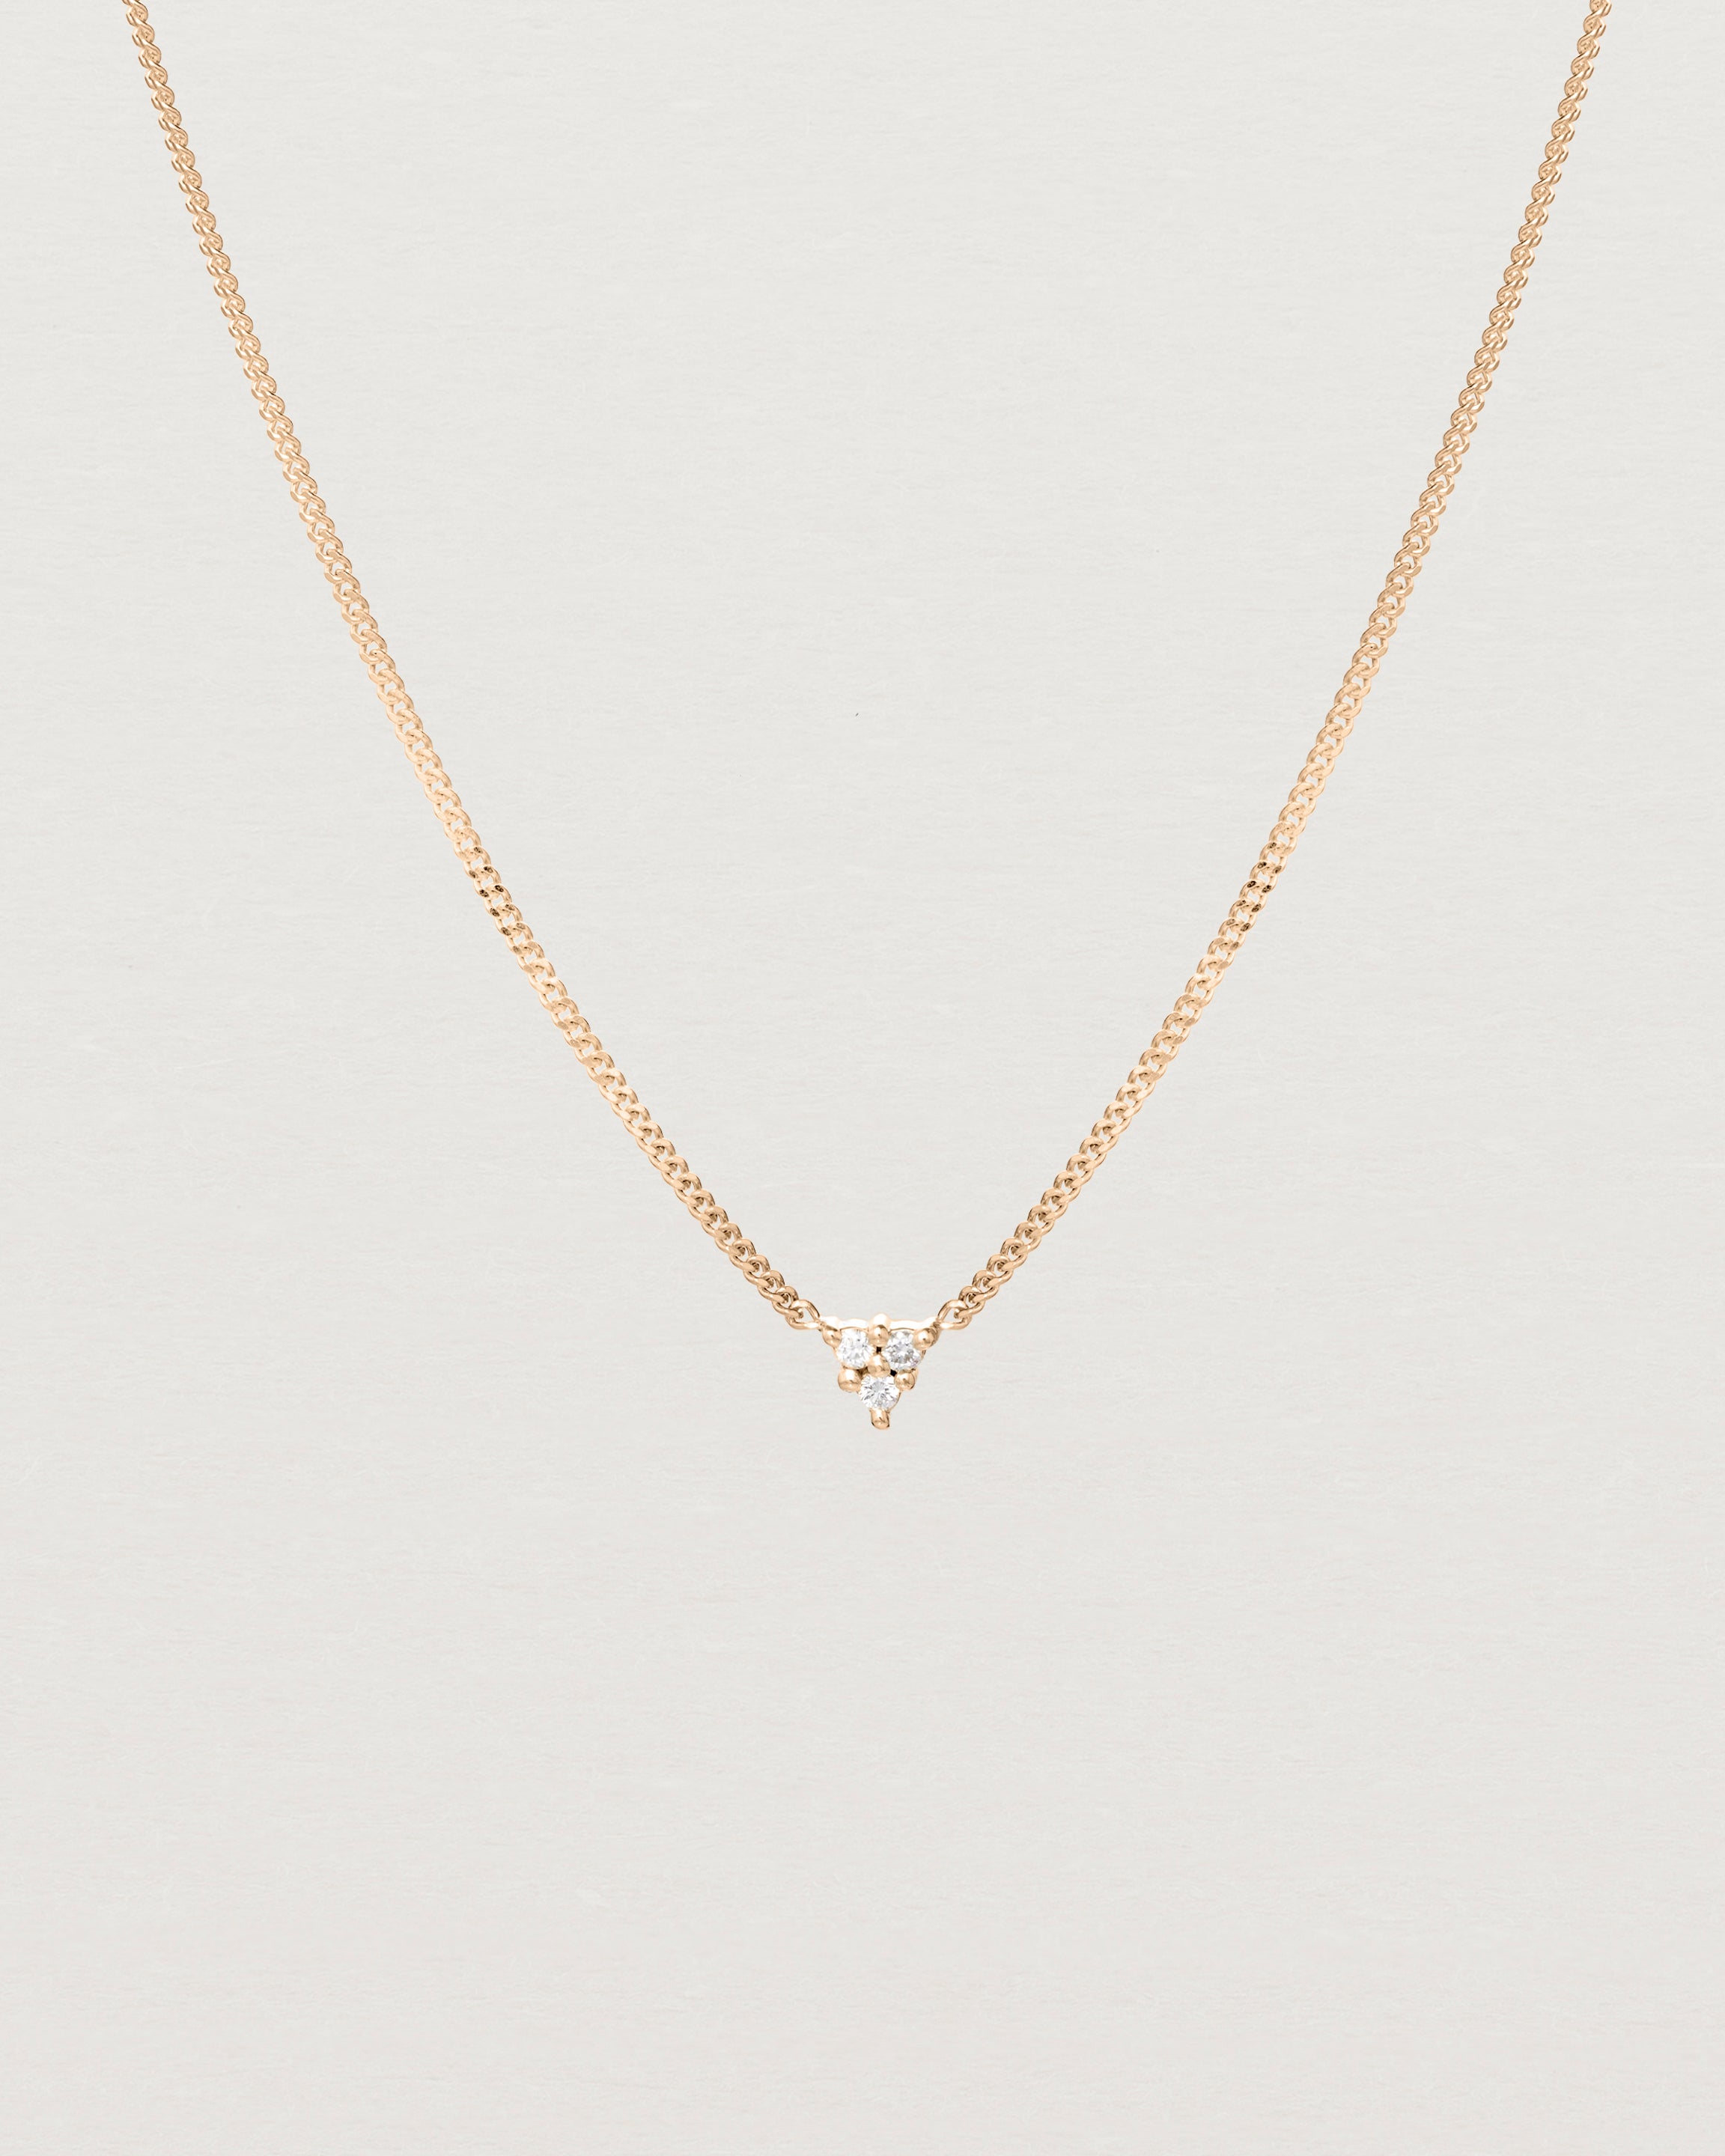 Close up view of the Kalani Necklace | Diamonds in rose gold.